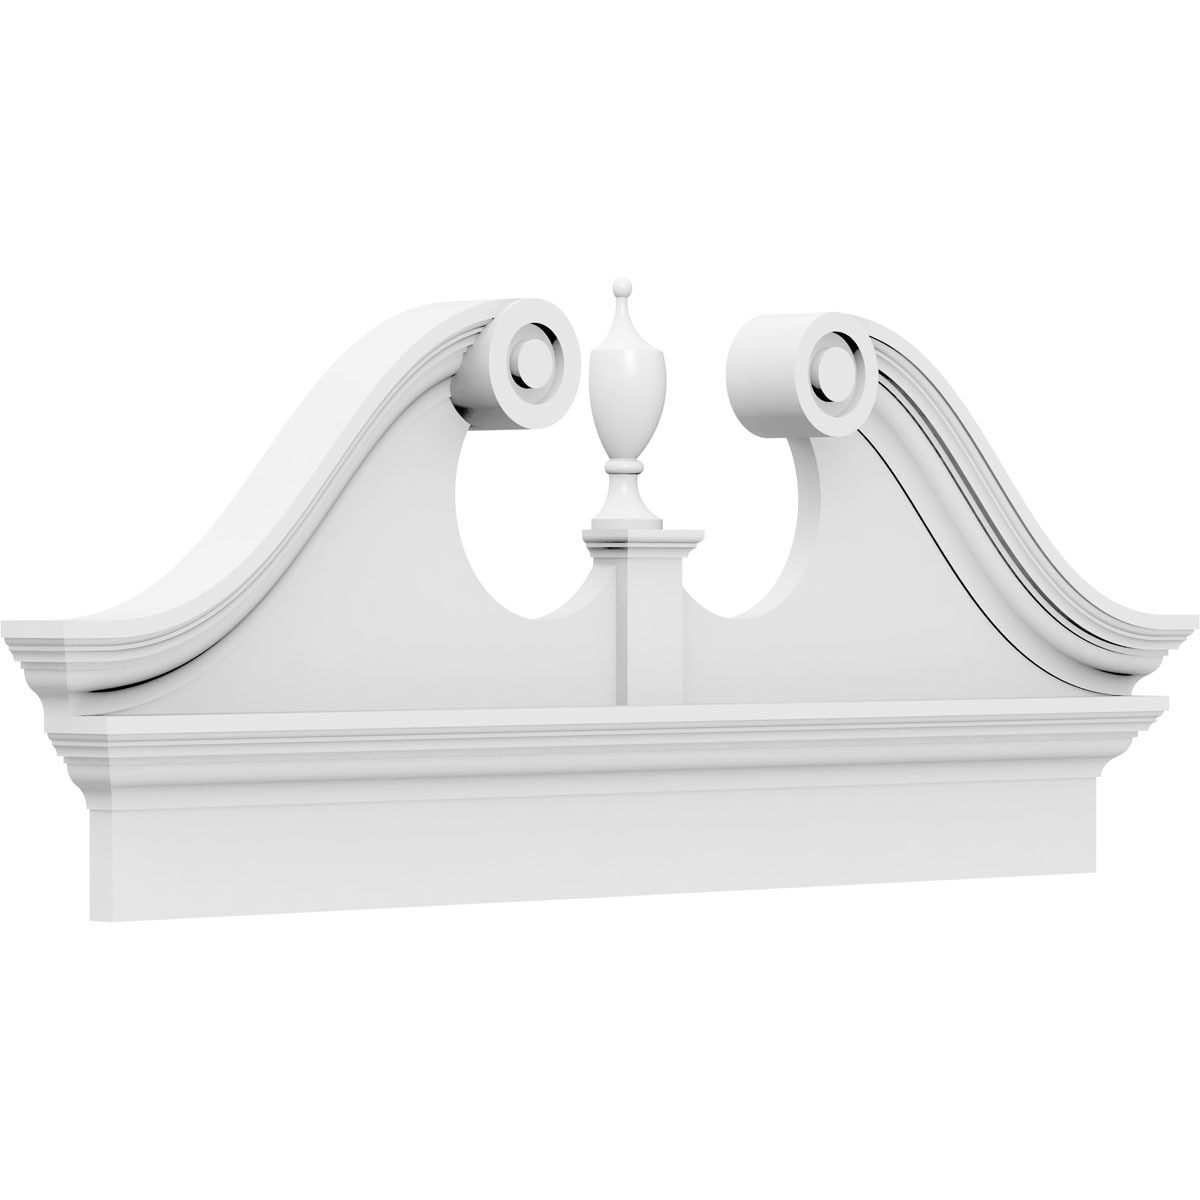 Ekena Millwork Rams Head 56-in x 20-7/8-in Unfinished PVC Pediment Entry Door Casing Accent in White | PEDPC056X210RHP00